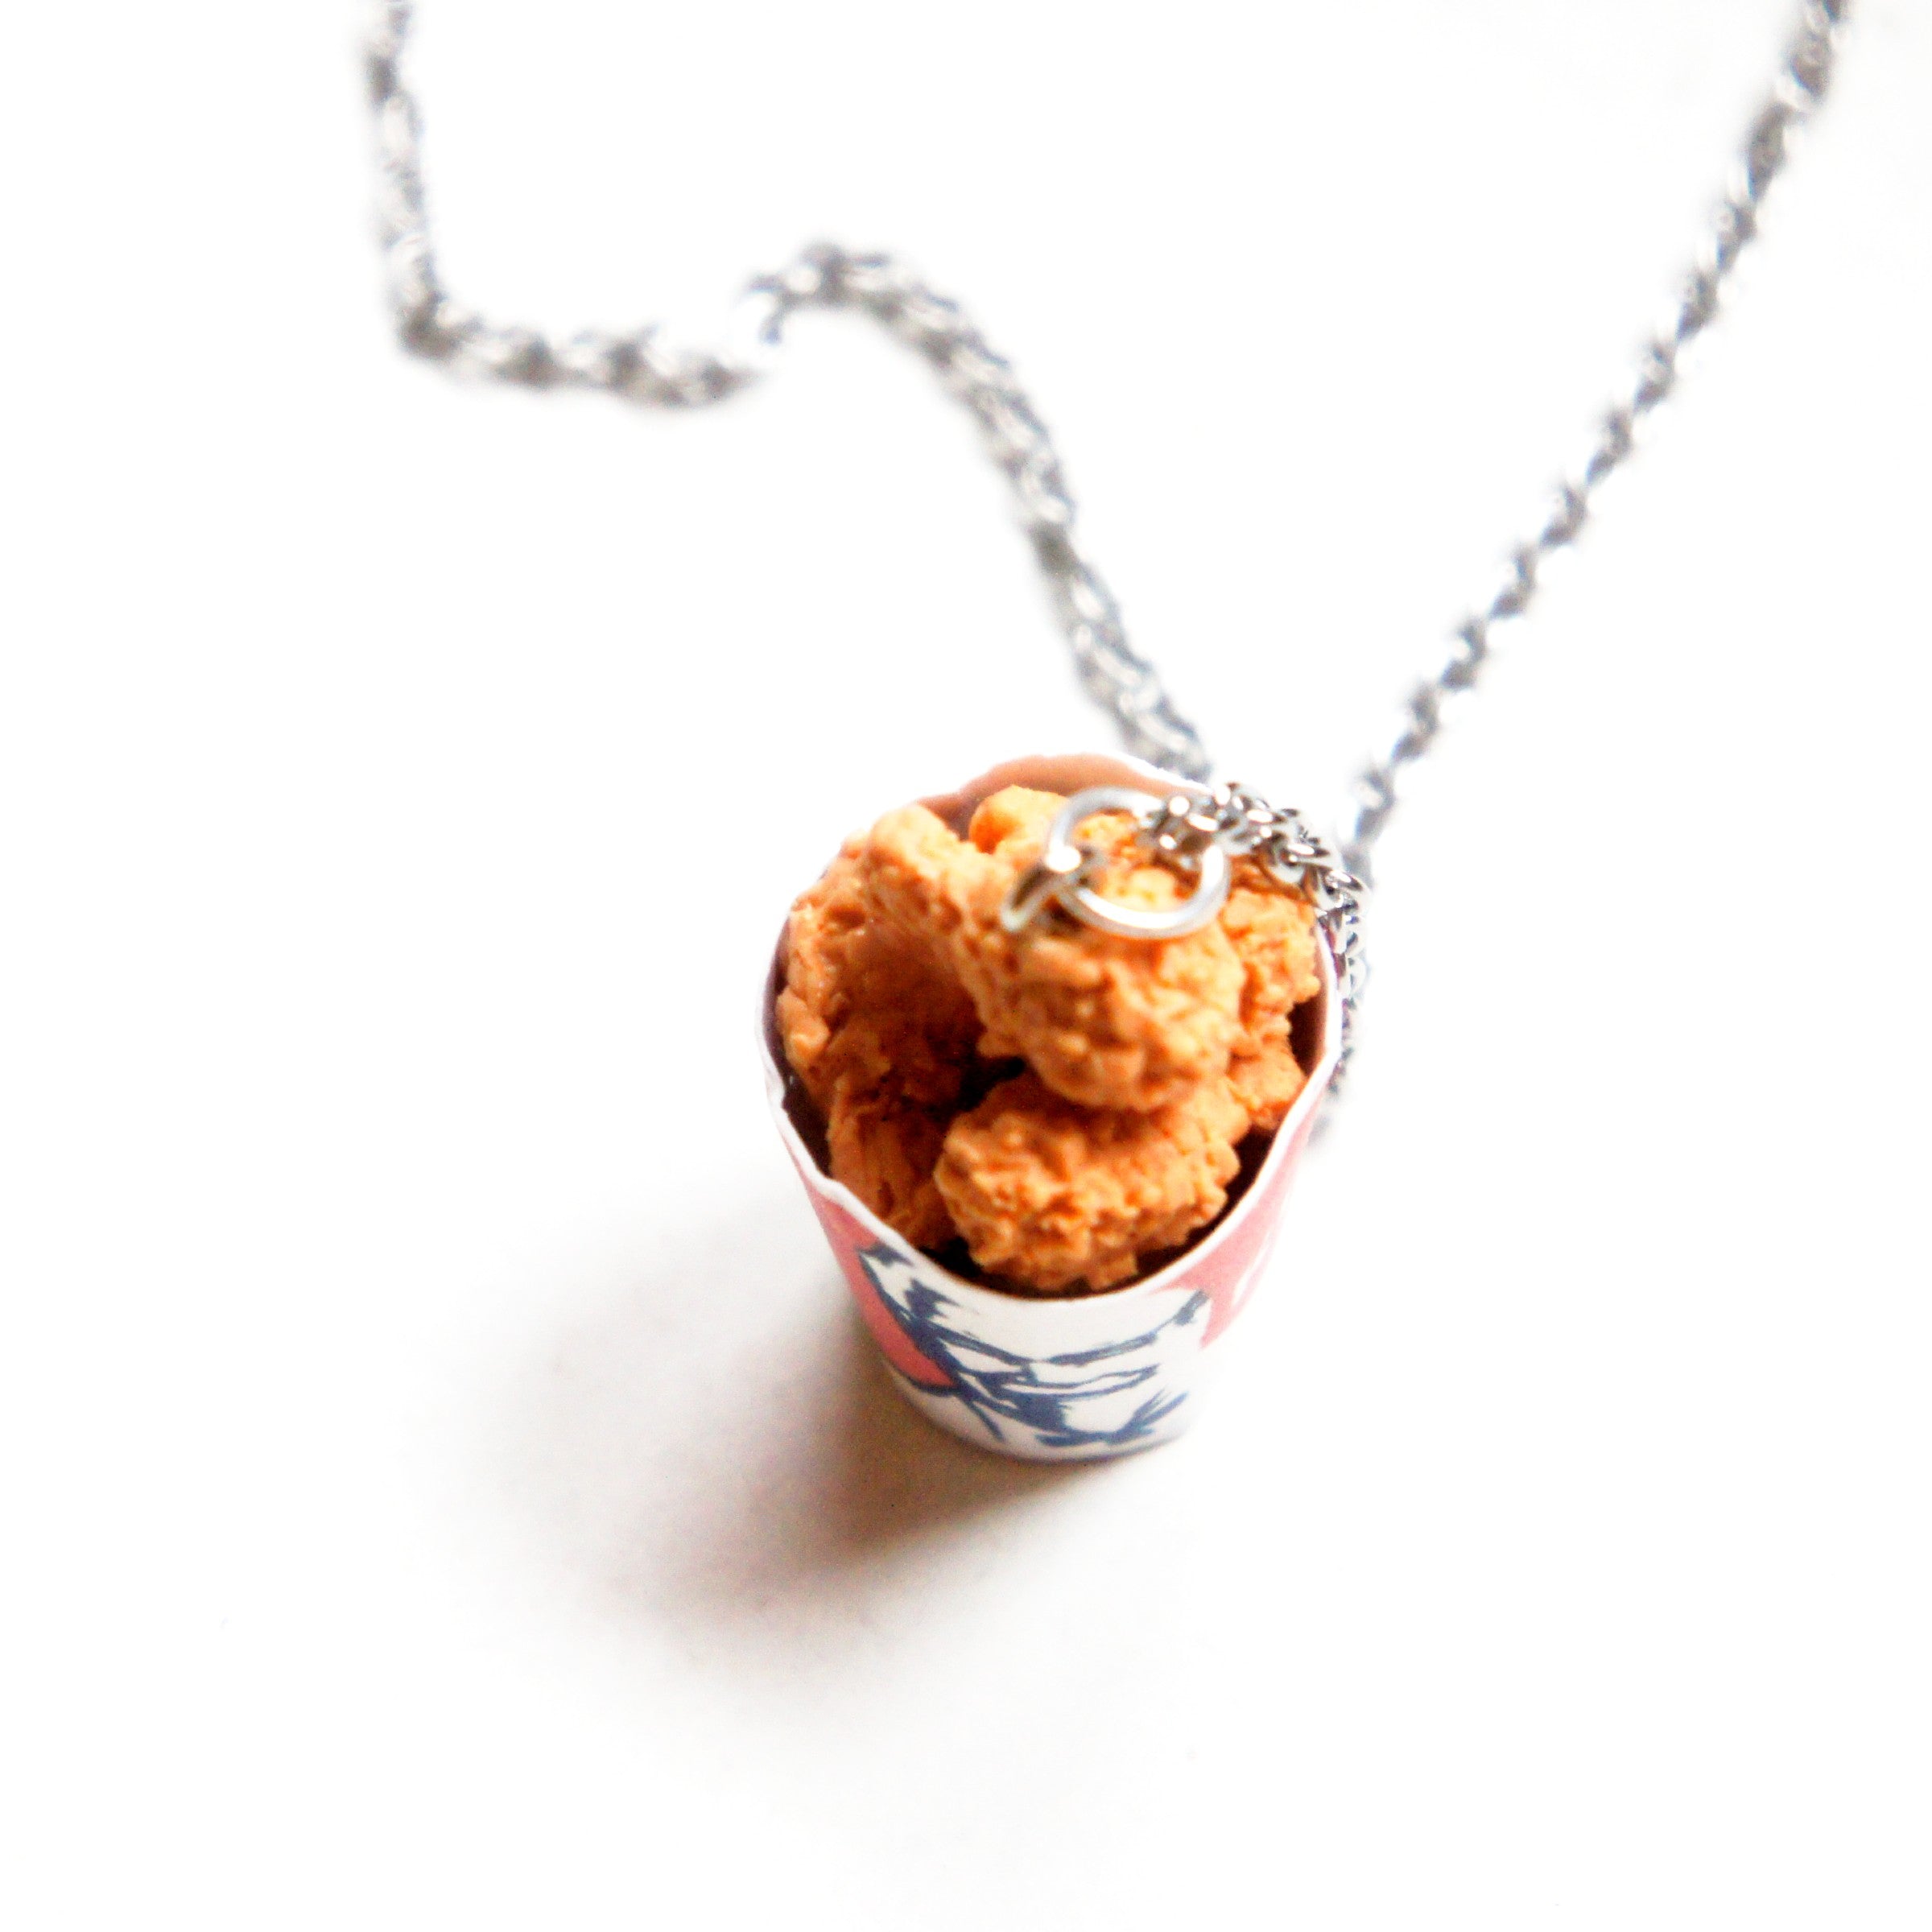 Emulation Fried Chicken Leg Pendant Necklace New Funny Accessories2574 From  Qqxcg, $22.46 | DHgate.Com